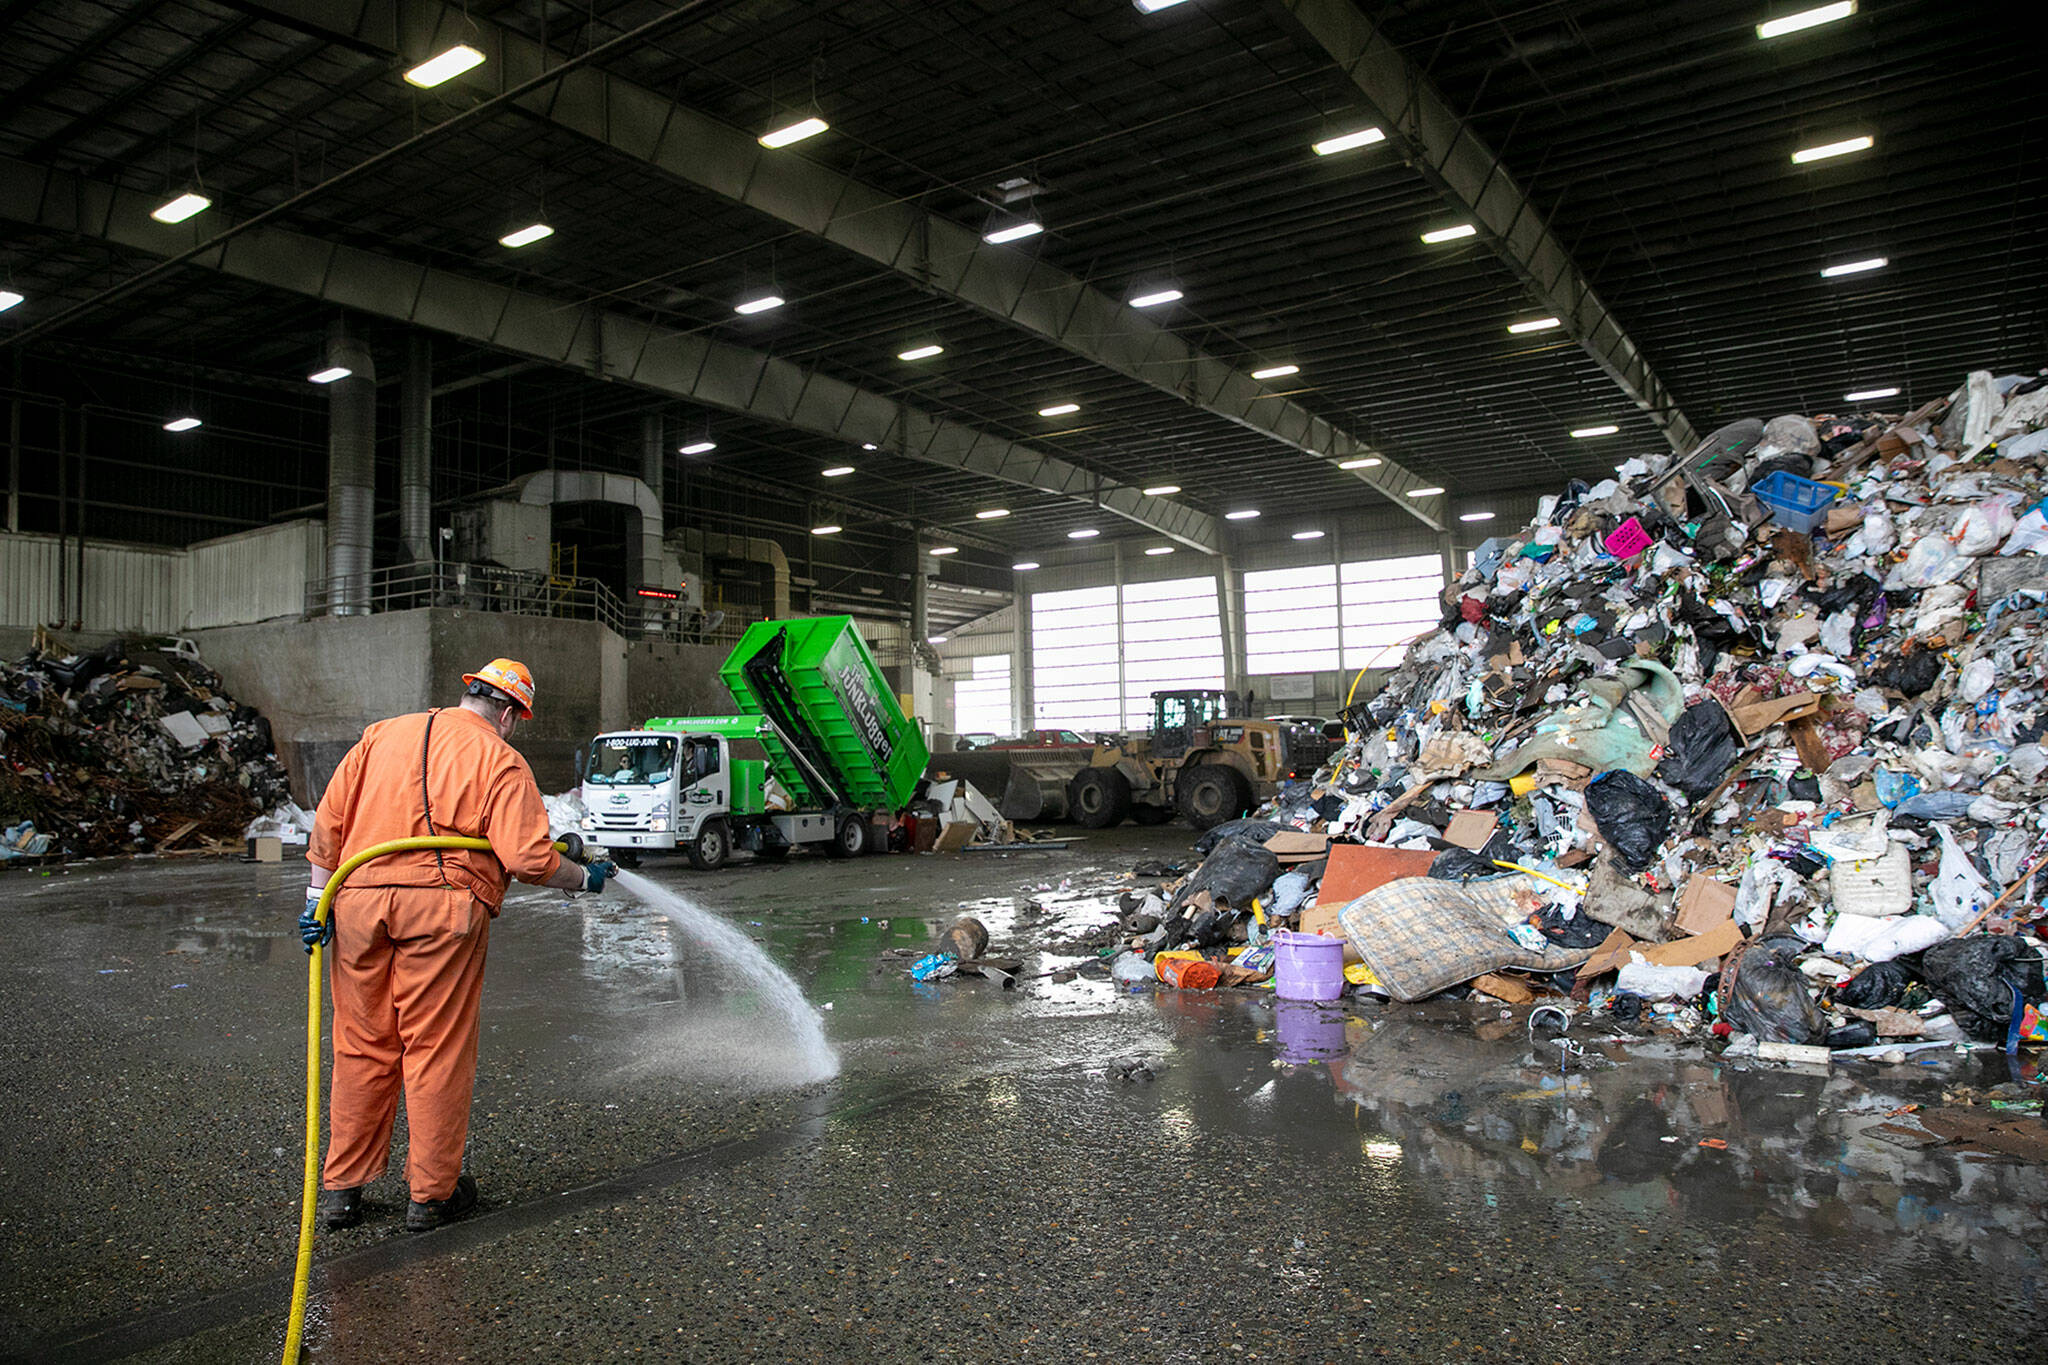 A worker is seen spraying down the floor of the Airport Road Recycling and Transfer Station during a period of backlogged garbage earlier this year on Friday, April 29, 2022, in Everett, Washington. (Ryan Berry / The Herald)